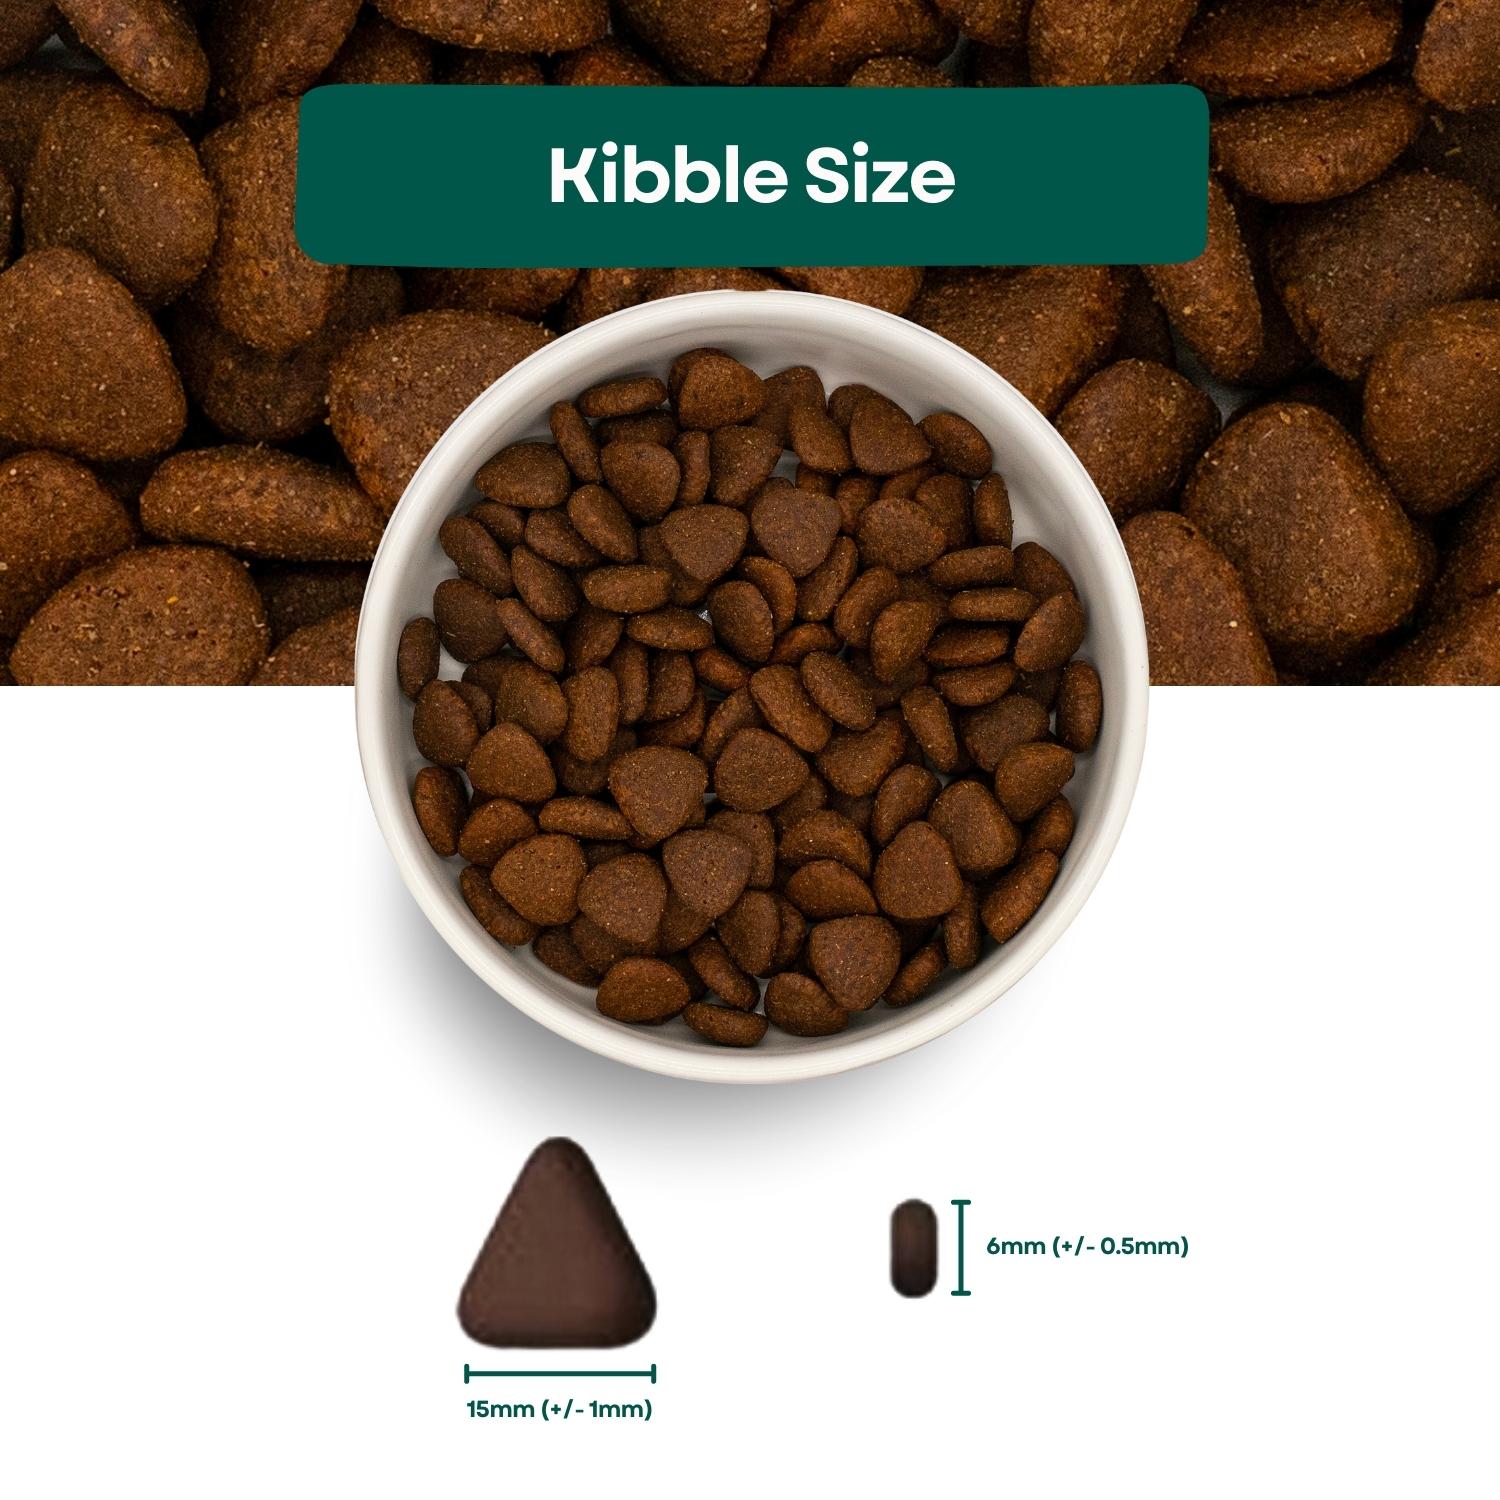 Kibble Size Superfood 65 Adult Dog Food - English Country Duck